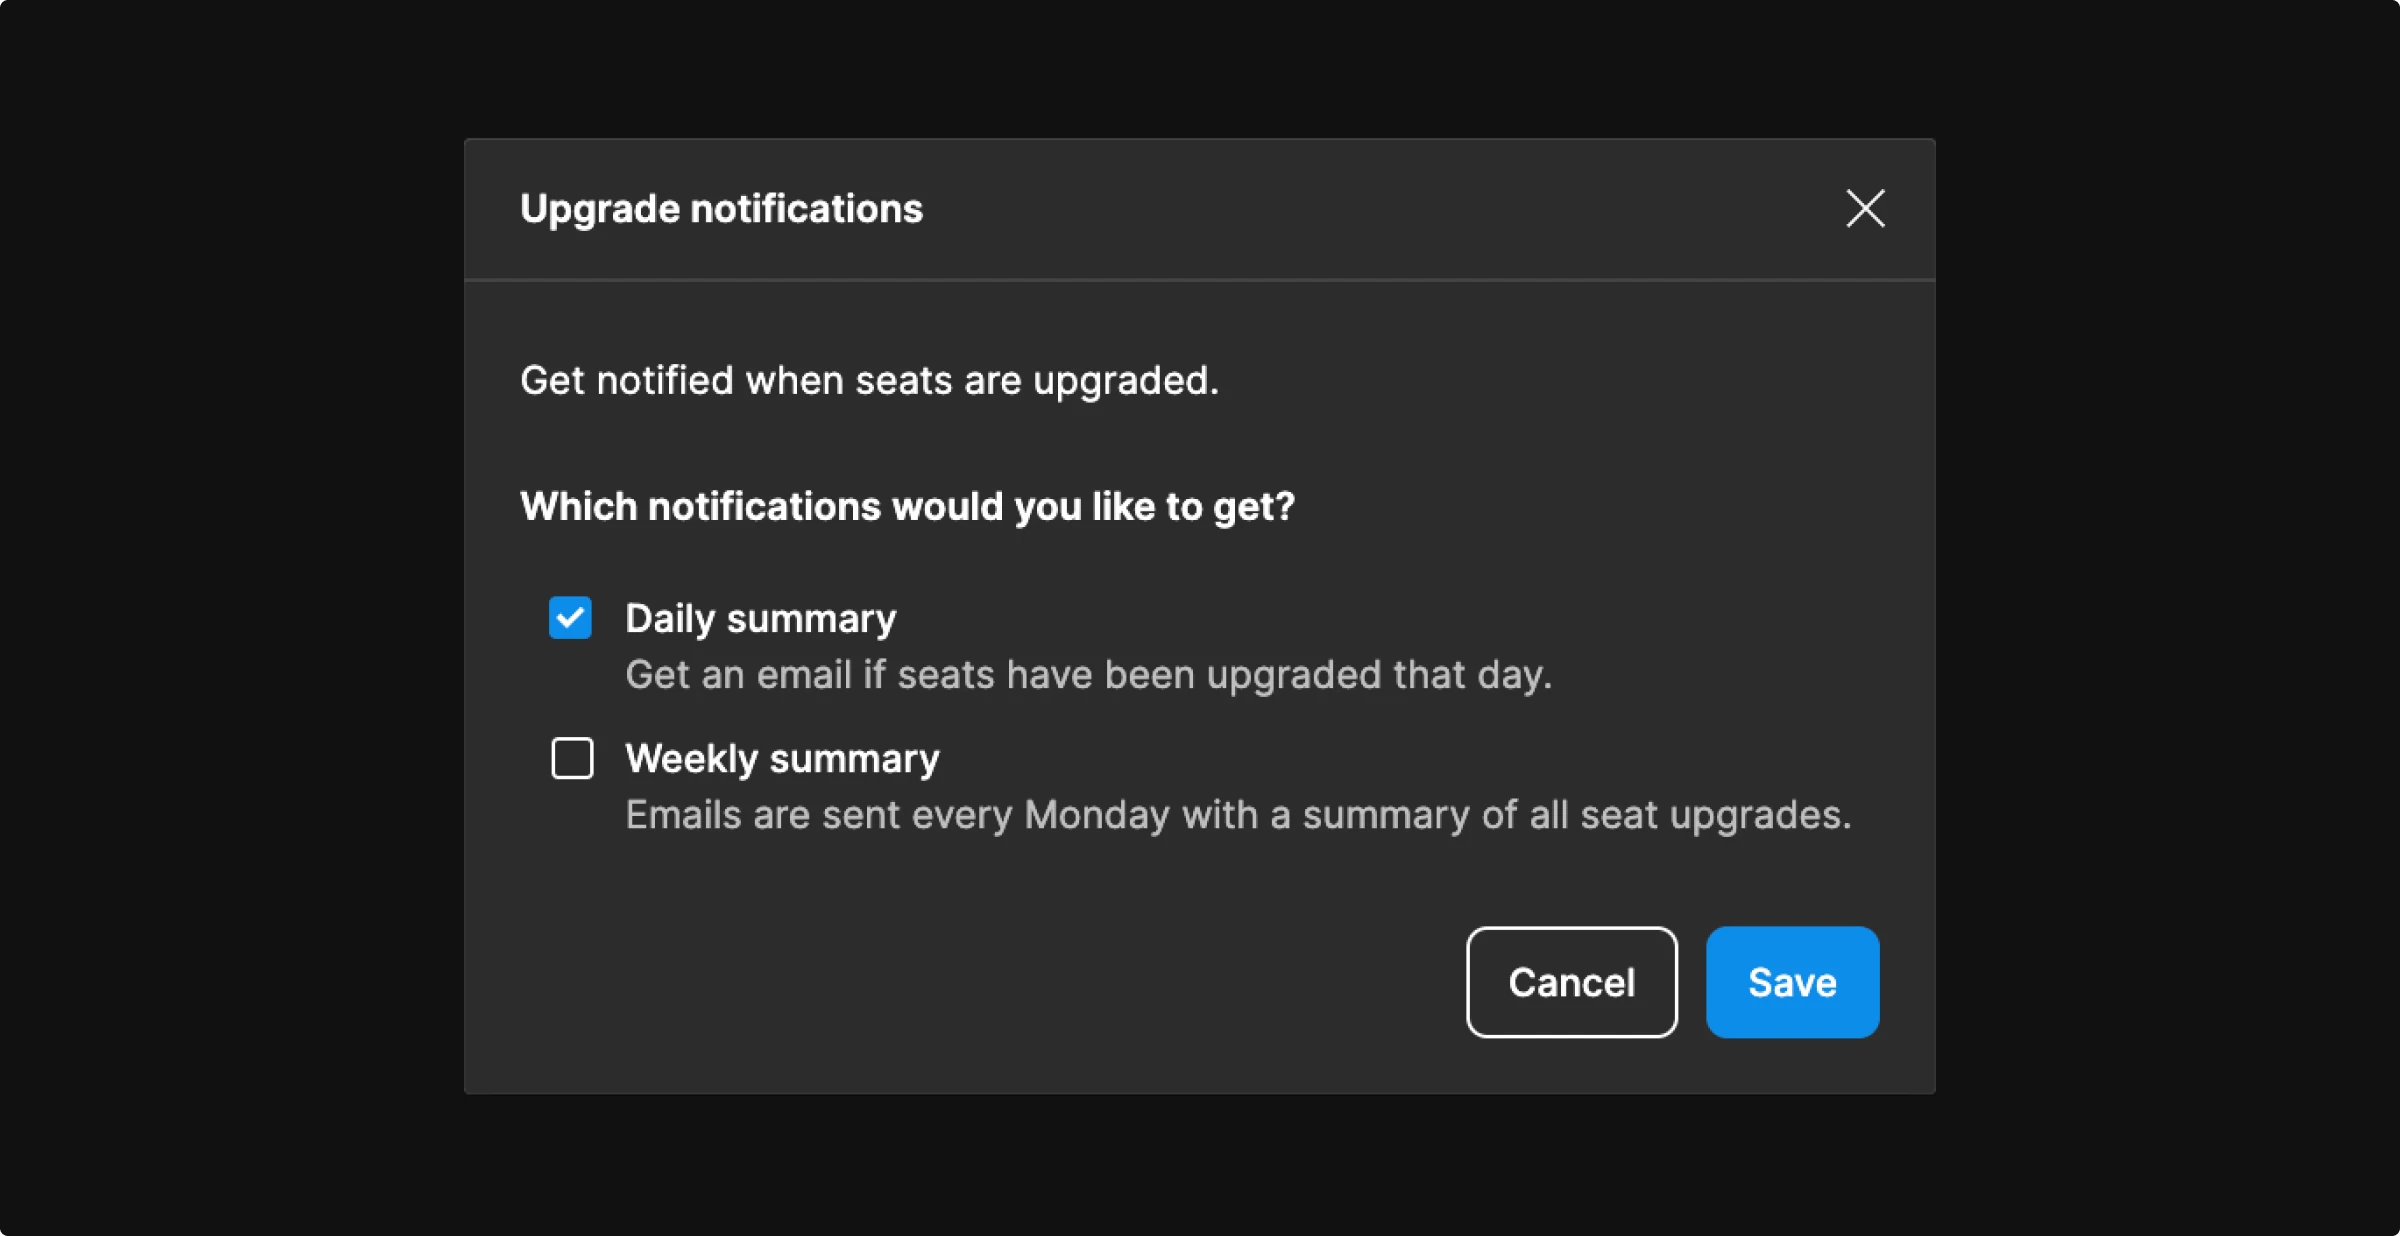 upgrade notifications in figma